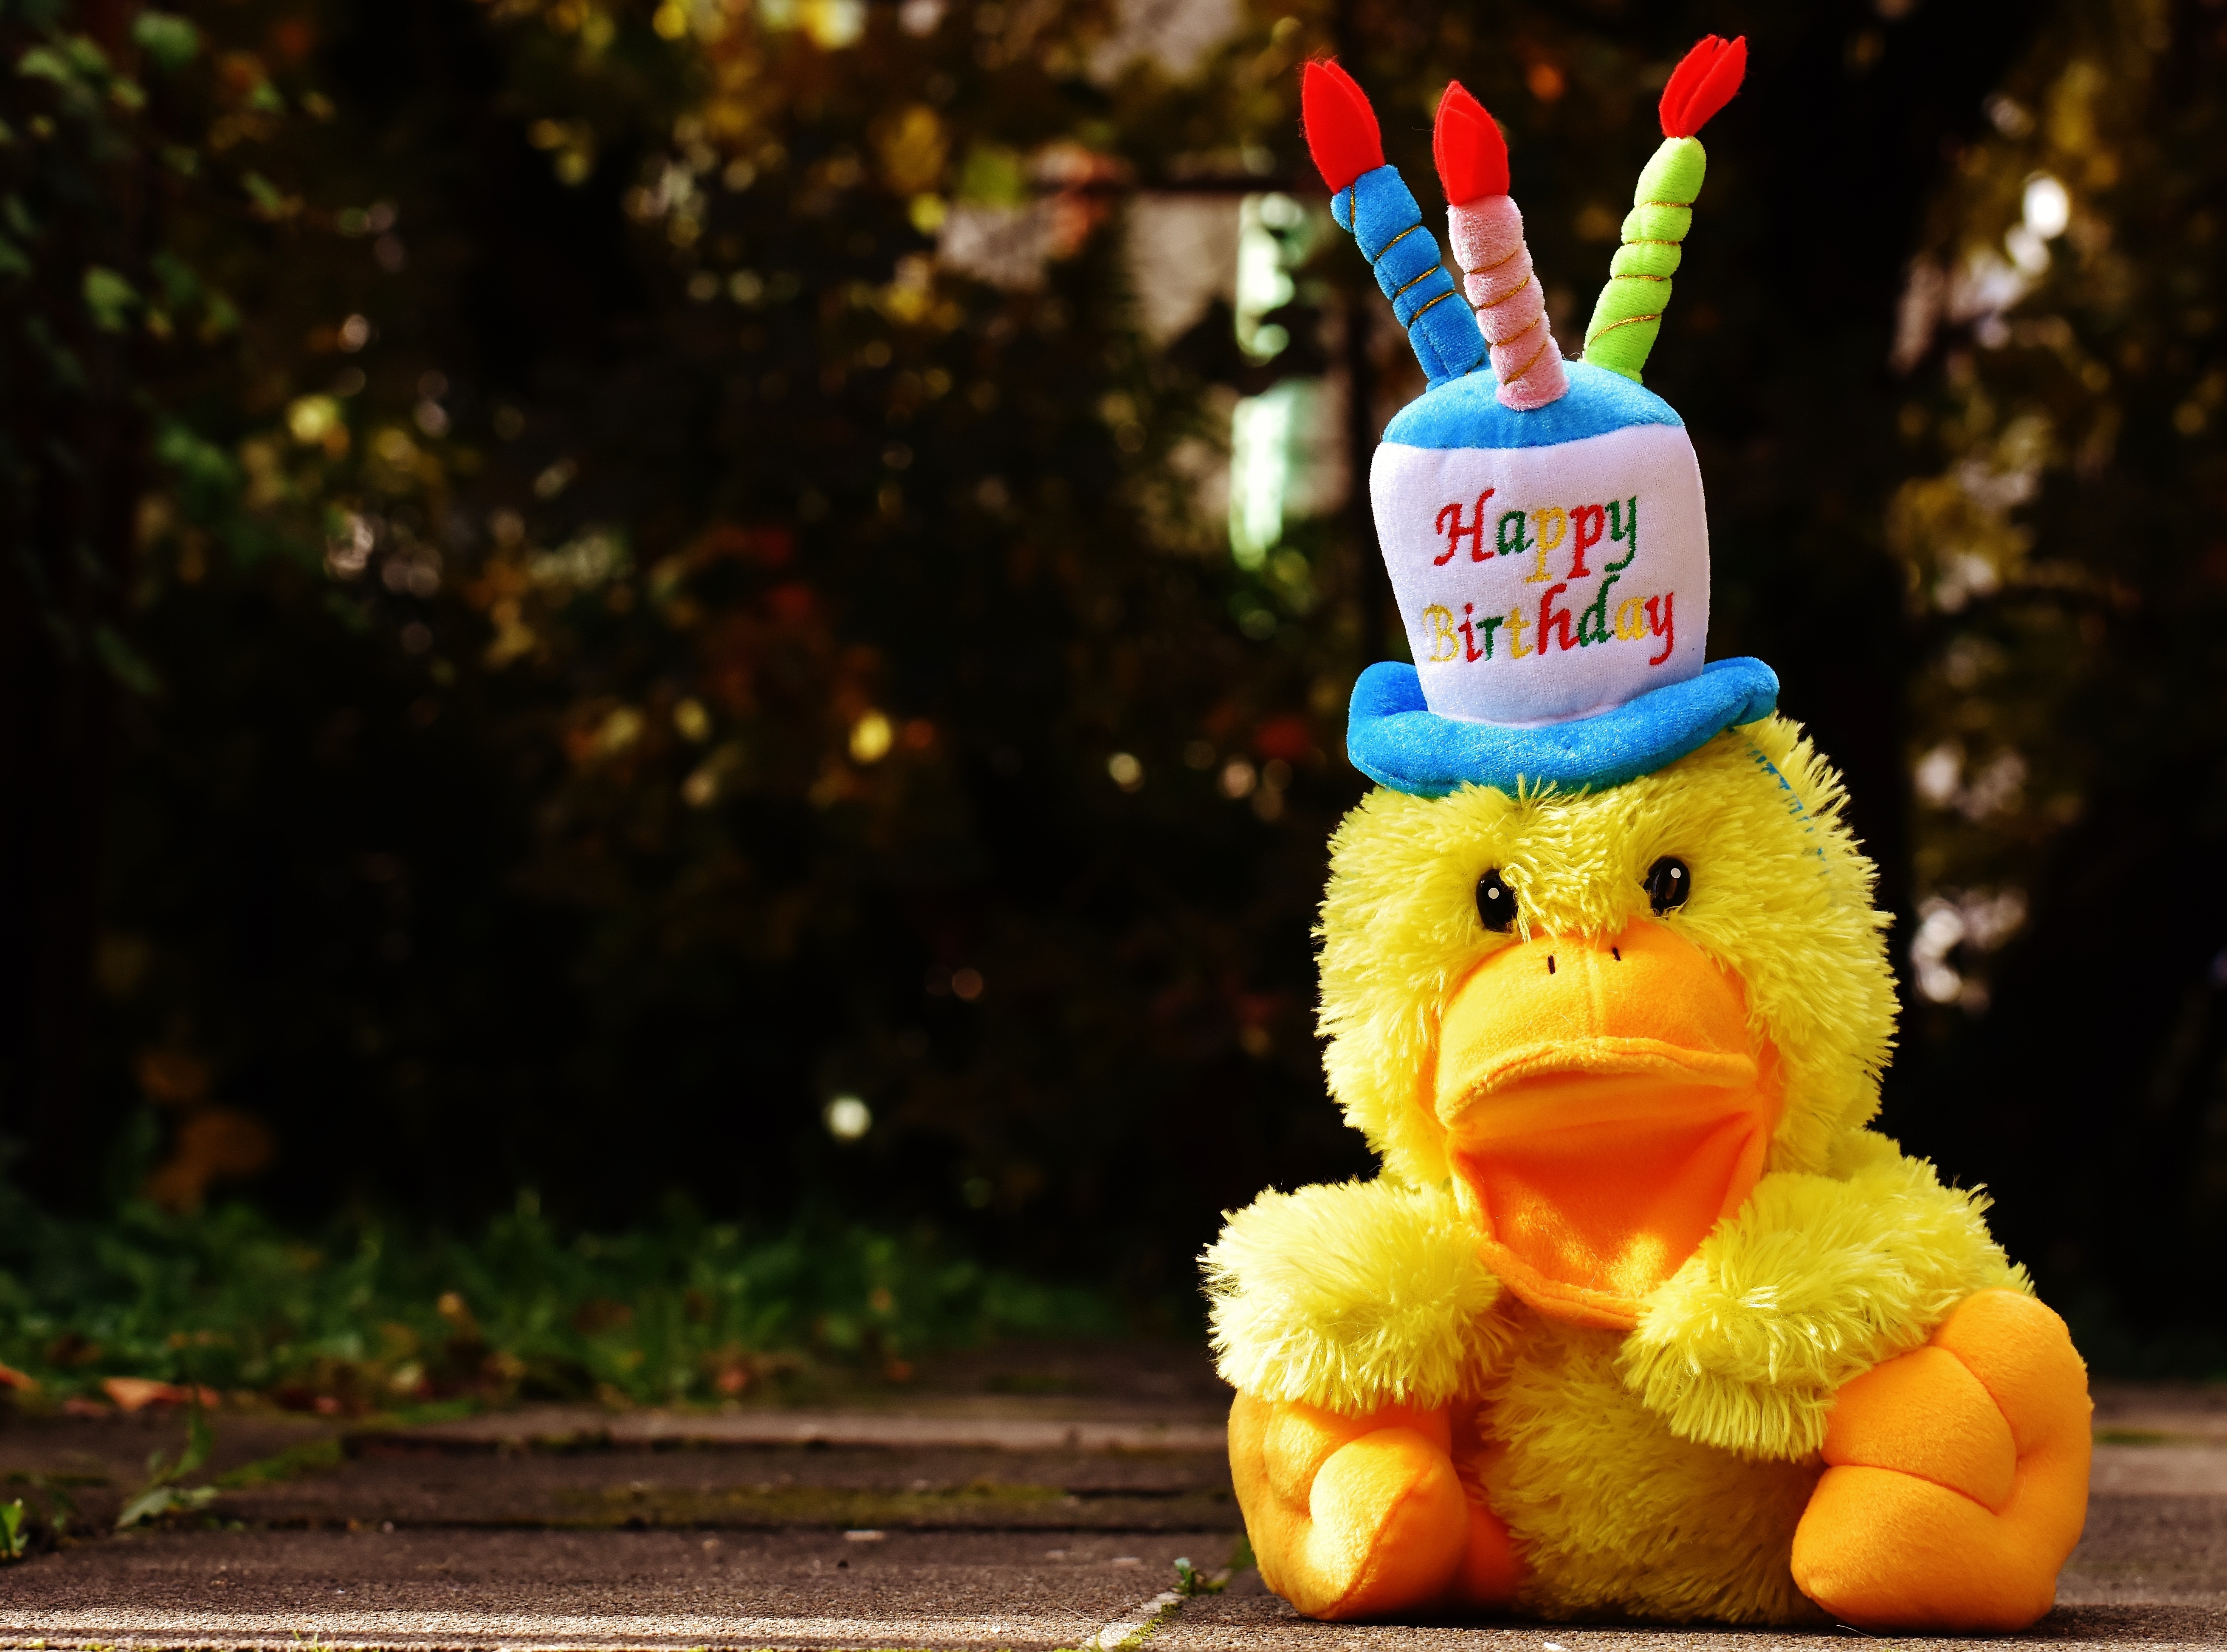 Free photo A stuffed duckling for a birthday party